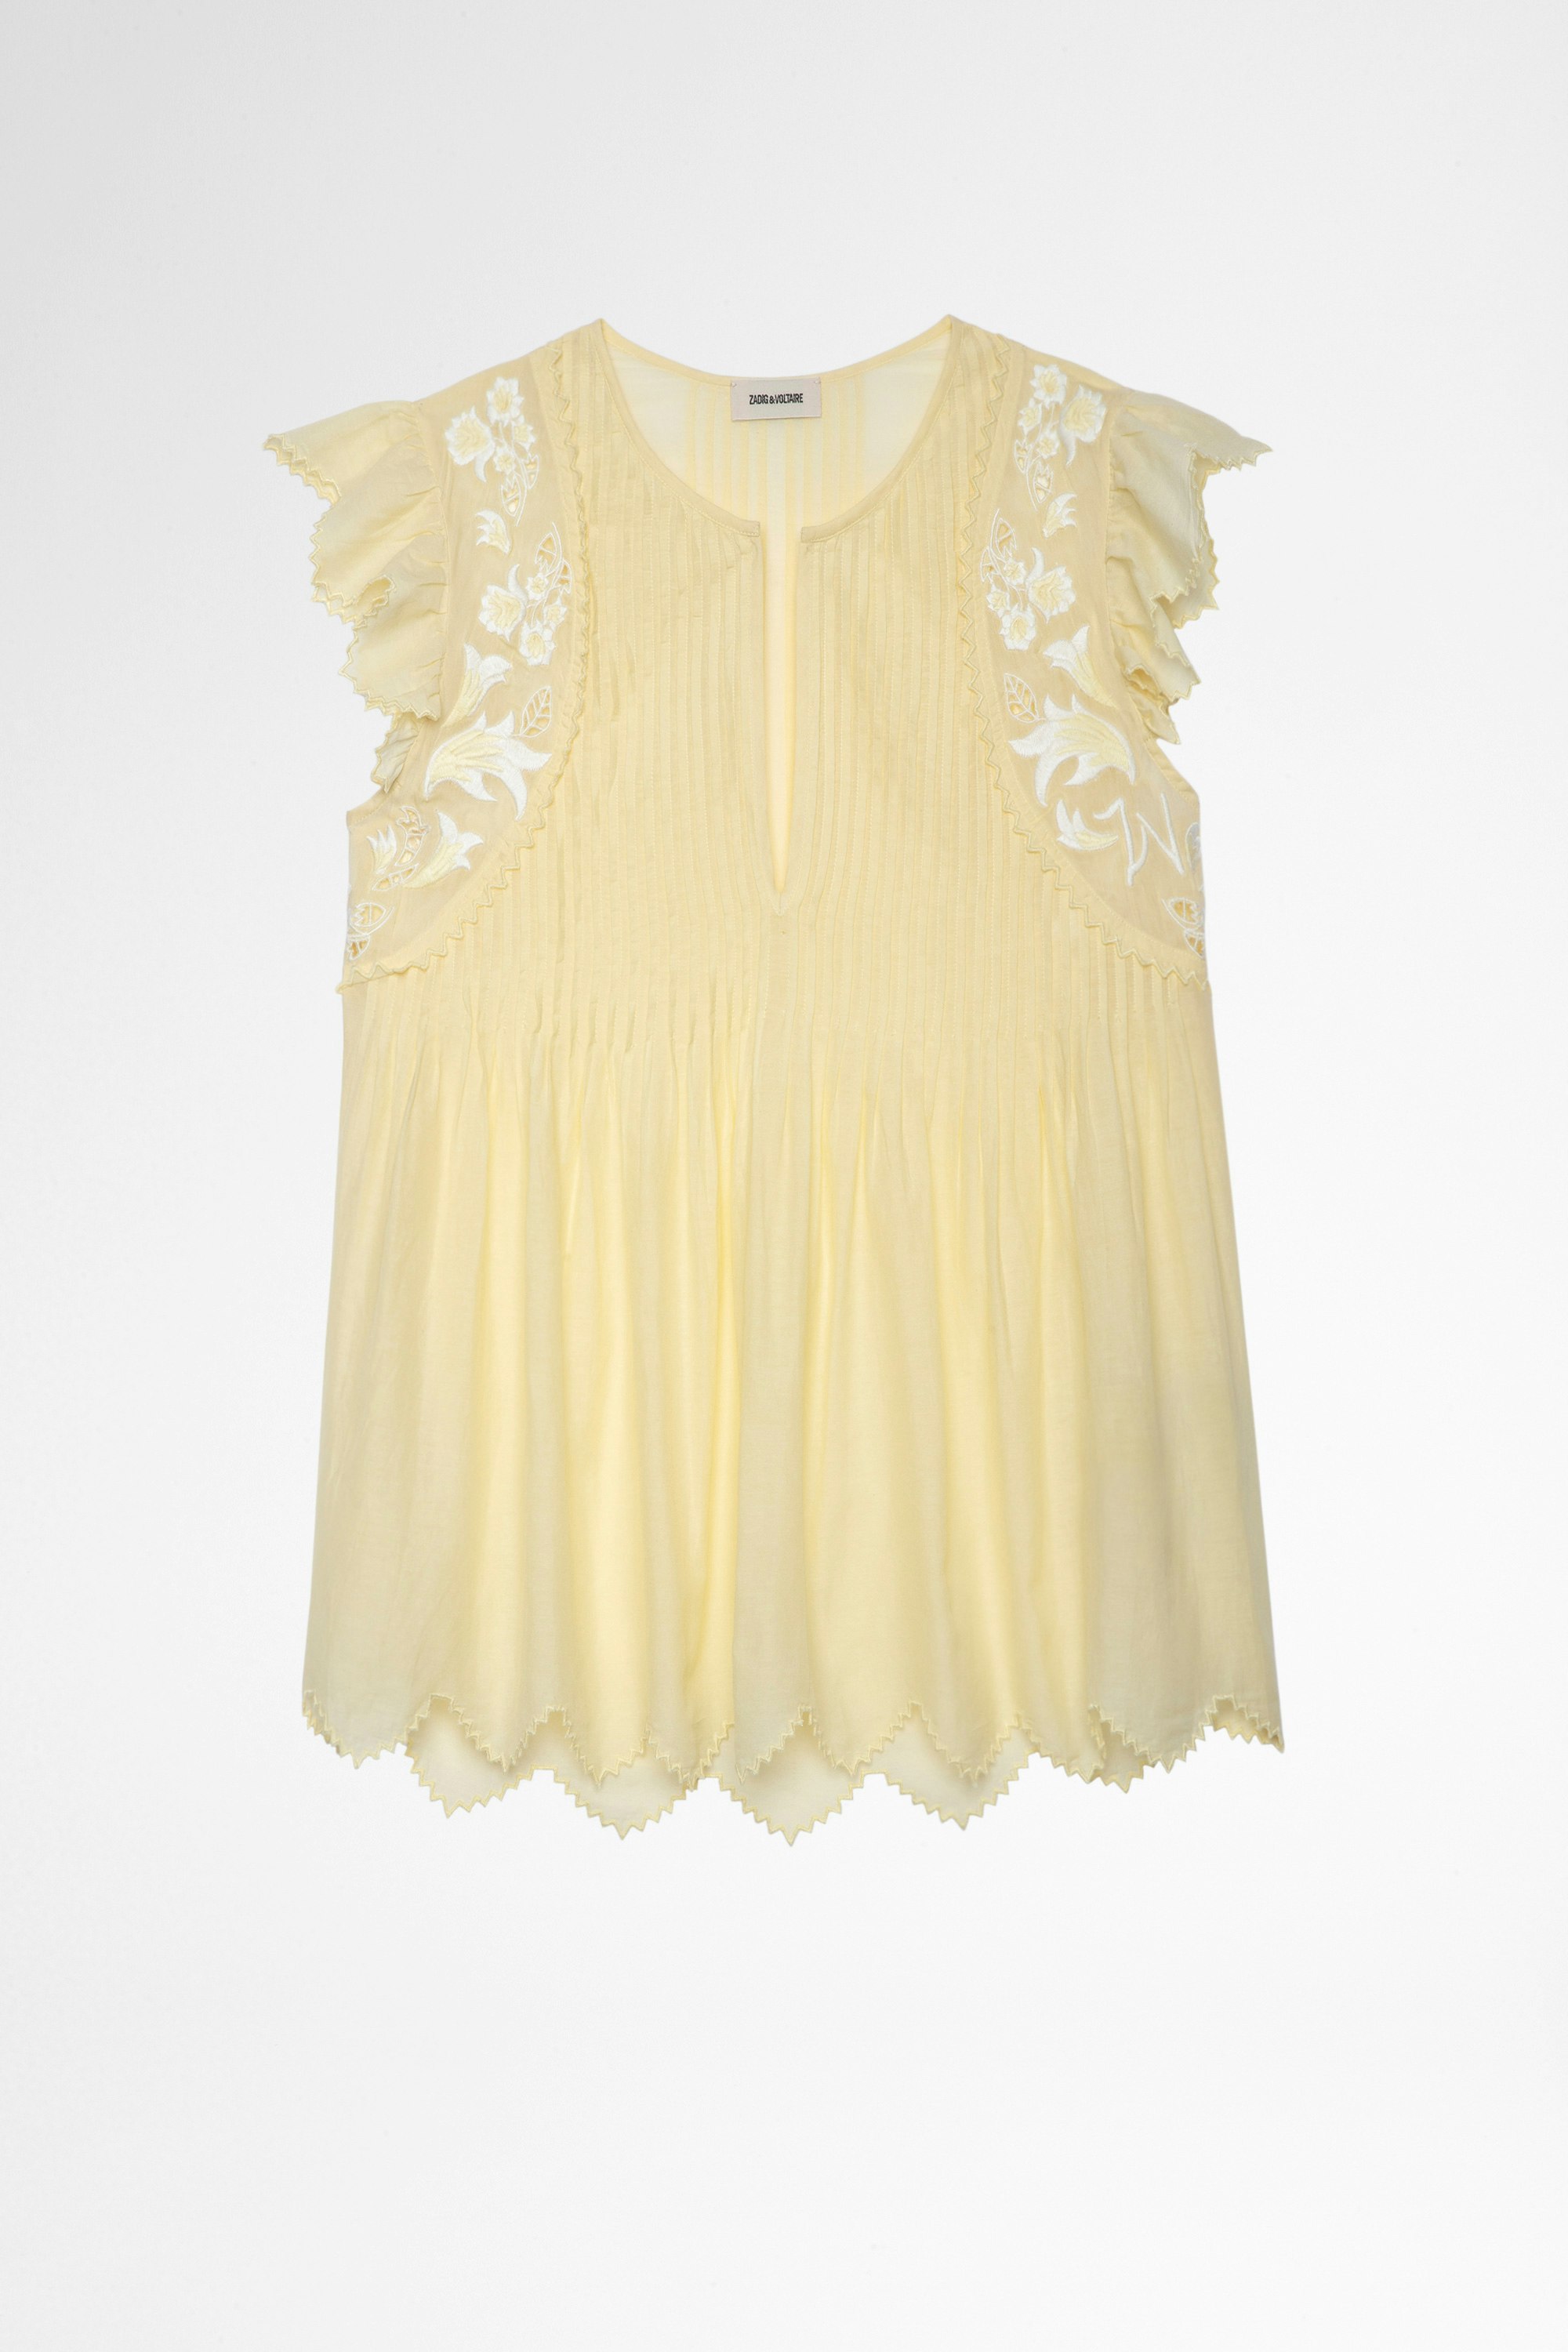 Tiara Top Women's cotton top in light yellow with lace panels